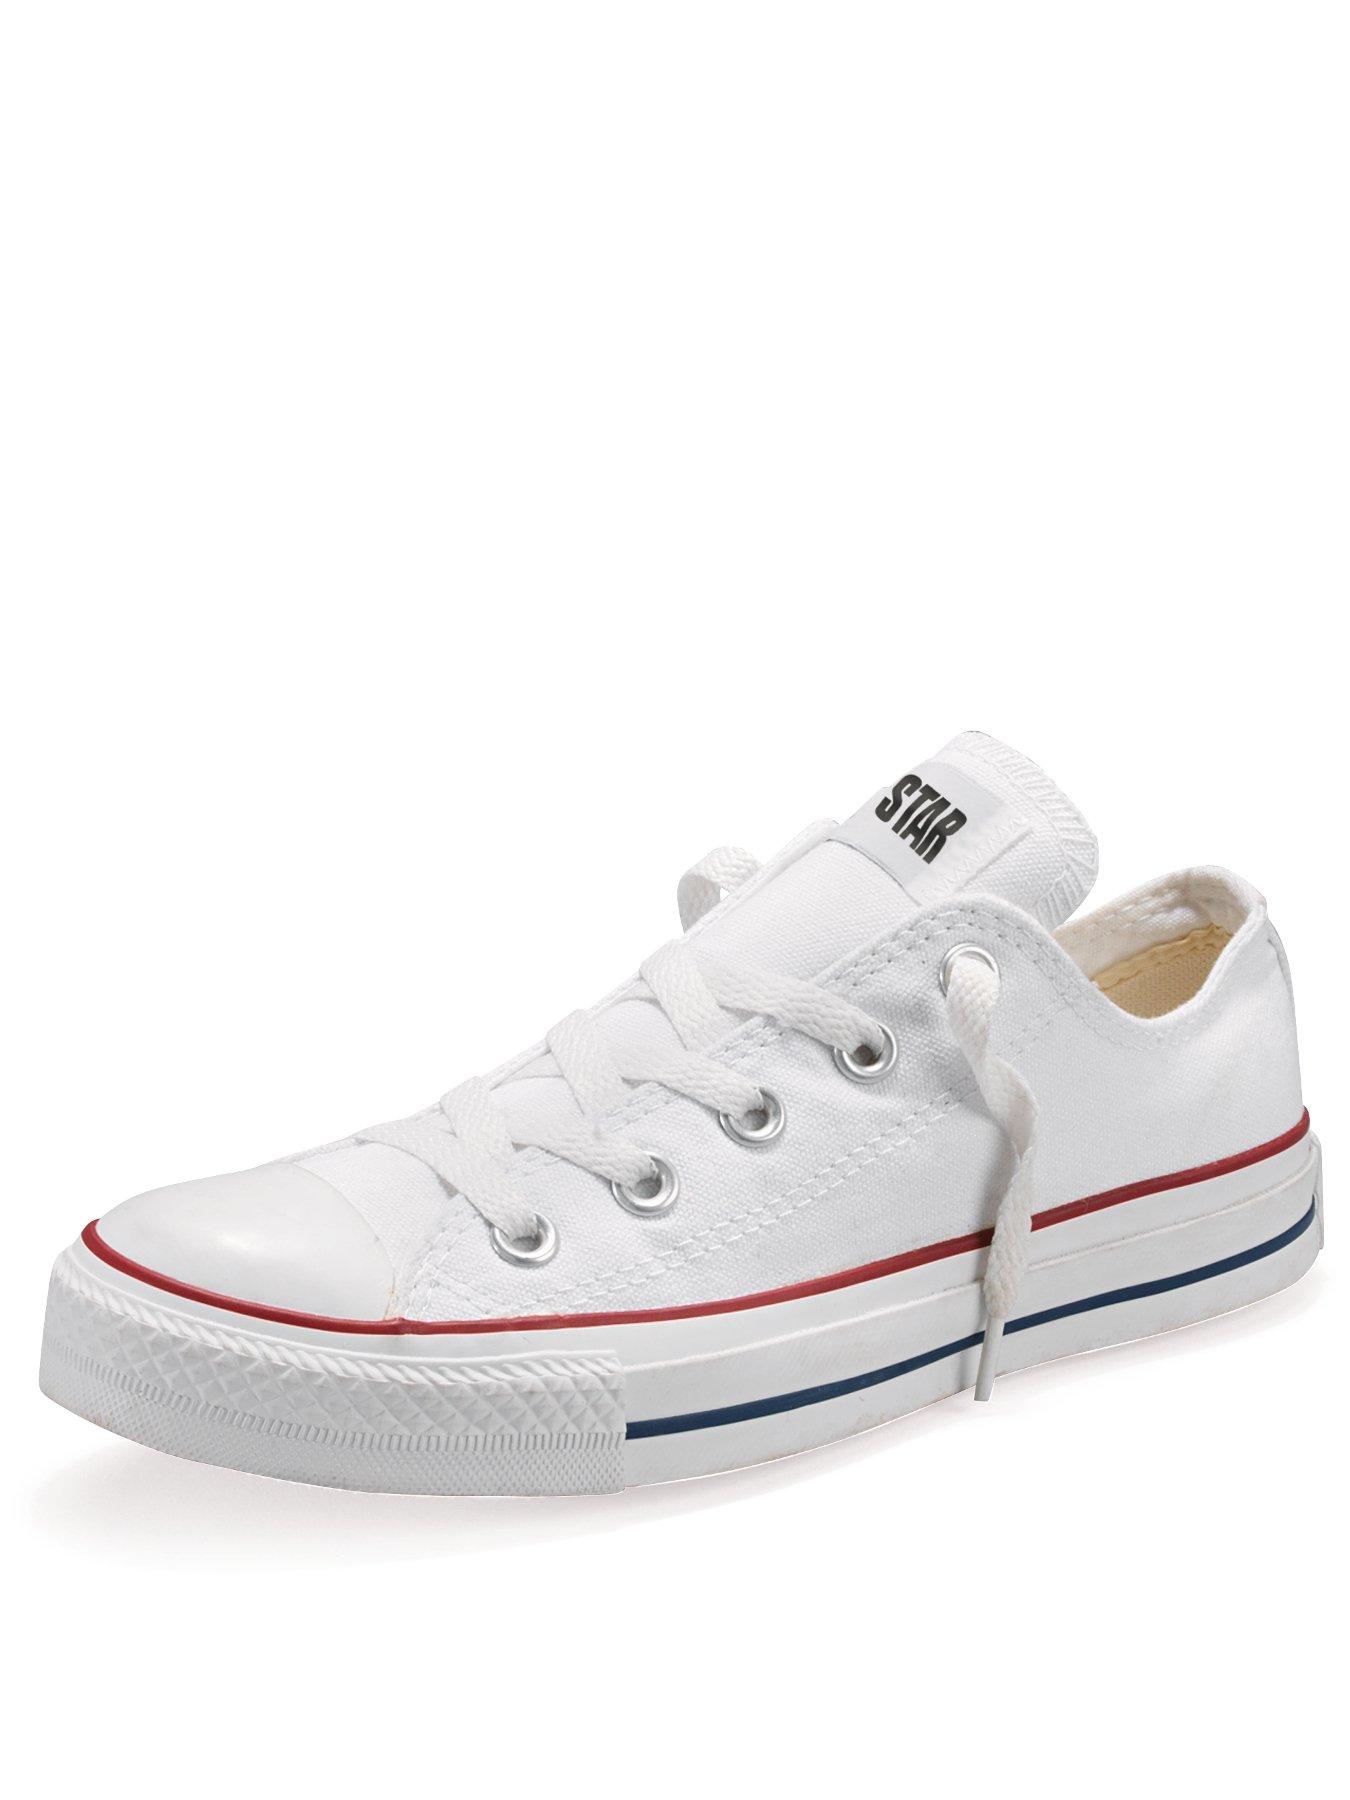 childrens converse trainers uk 